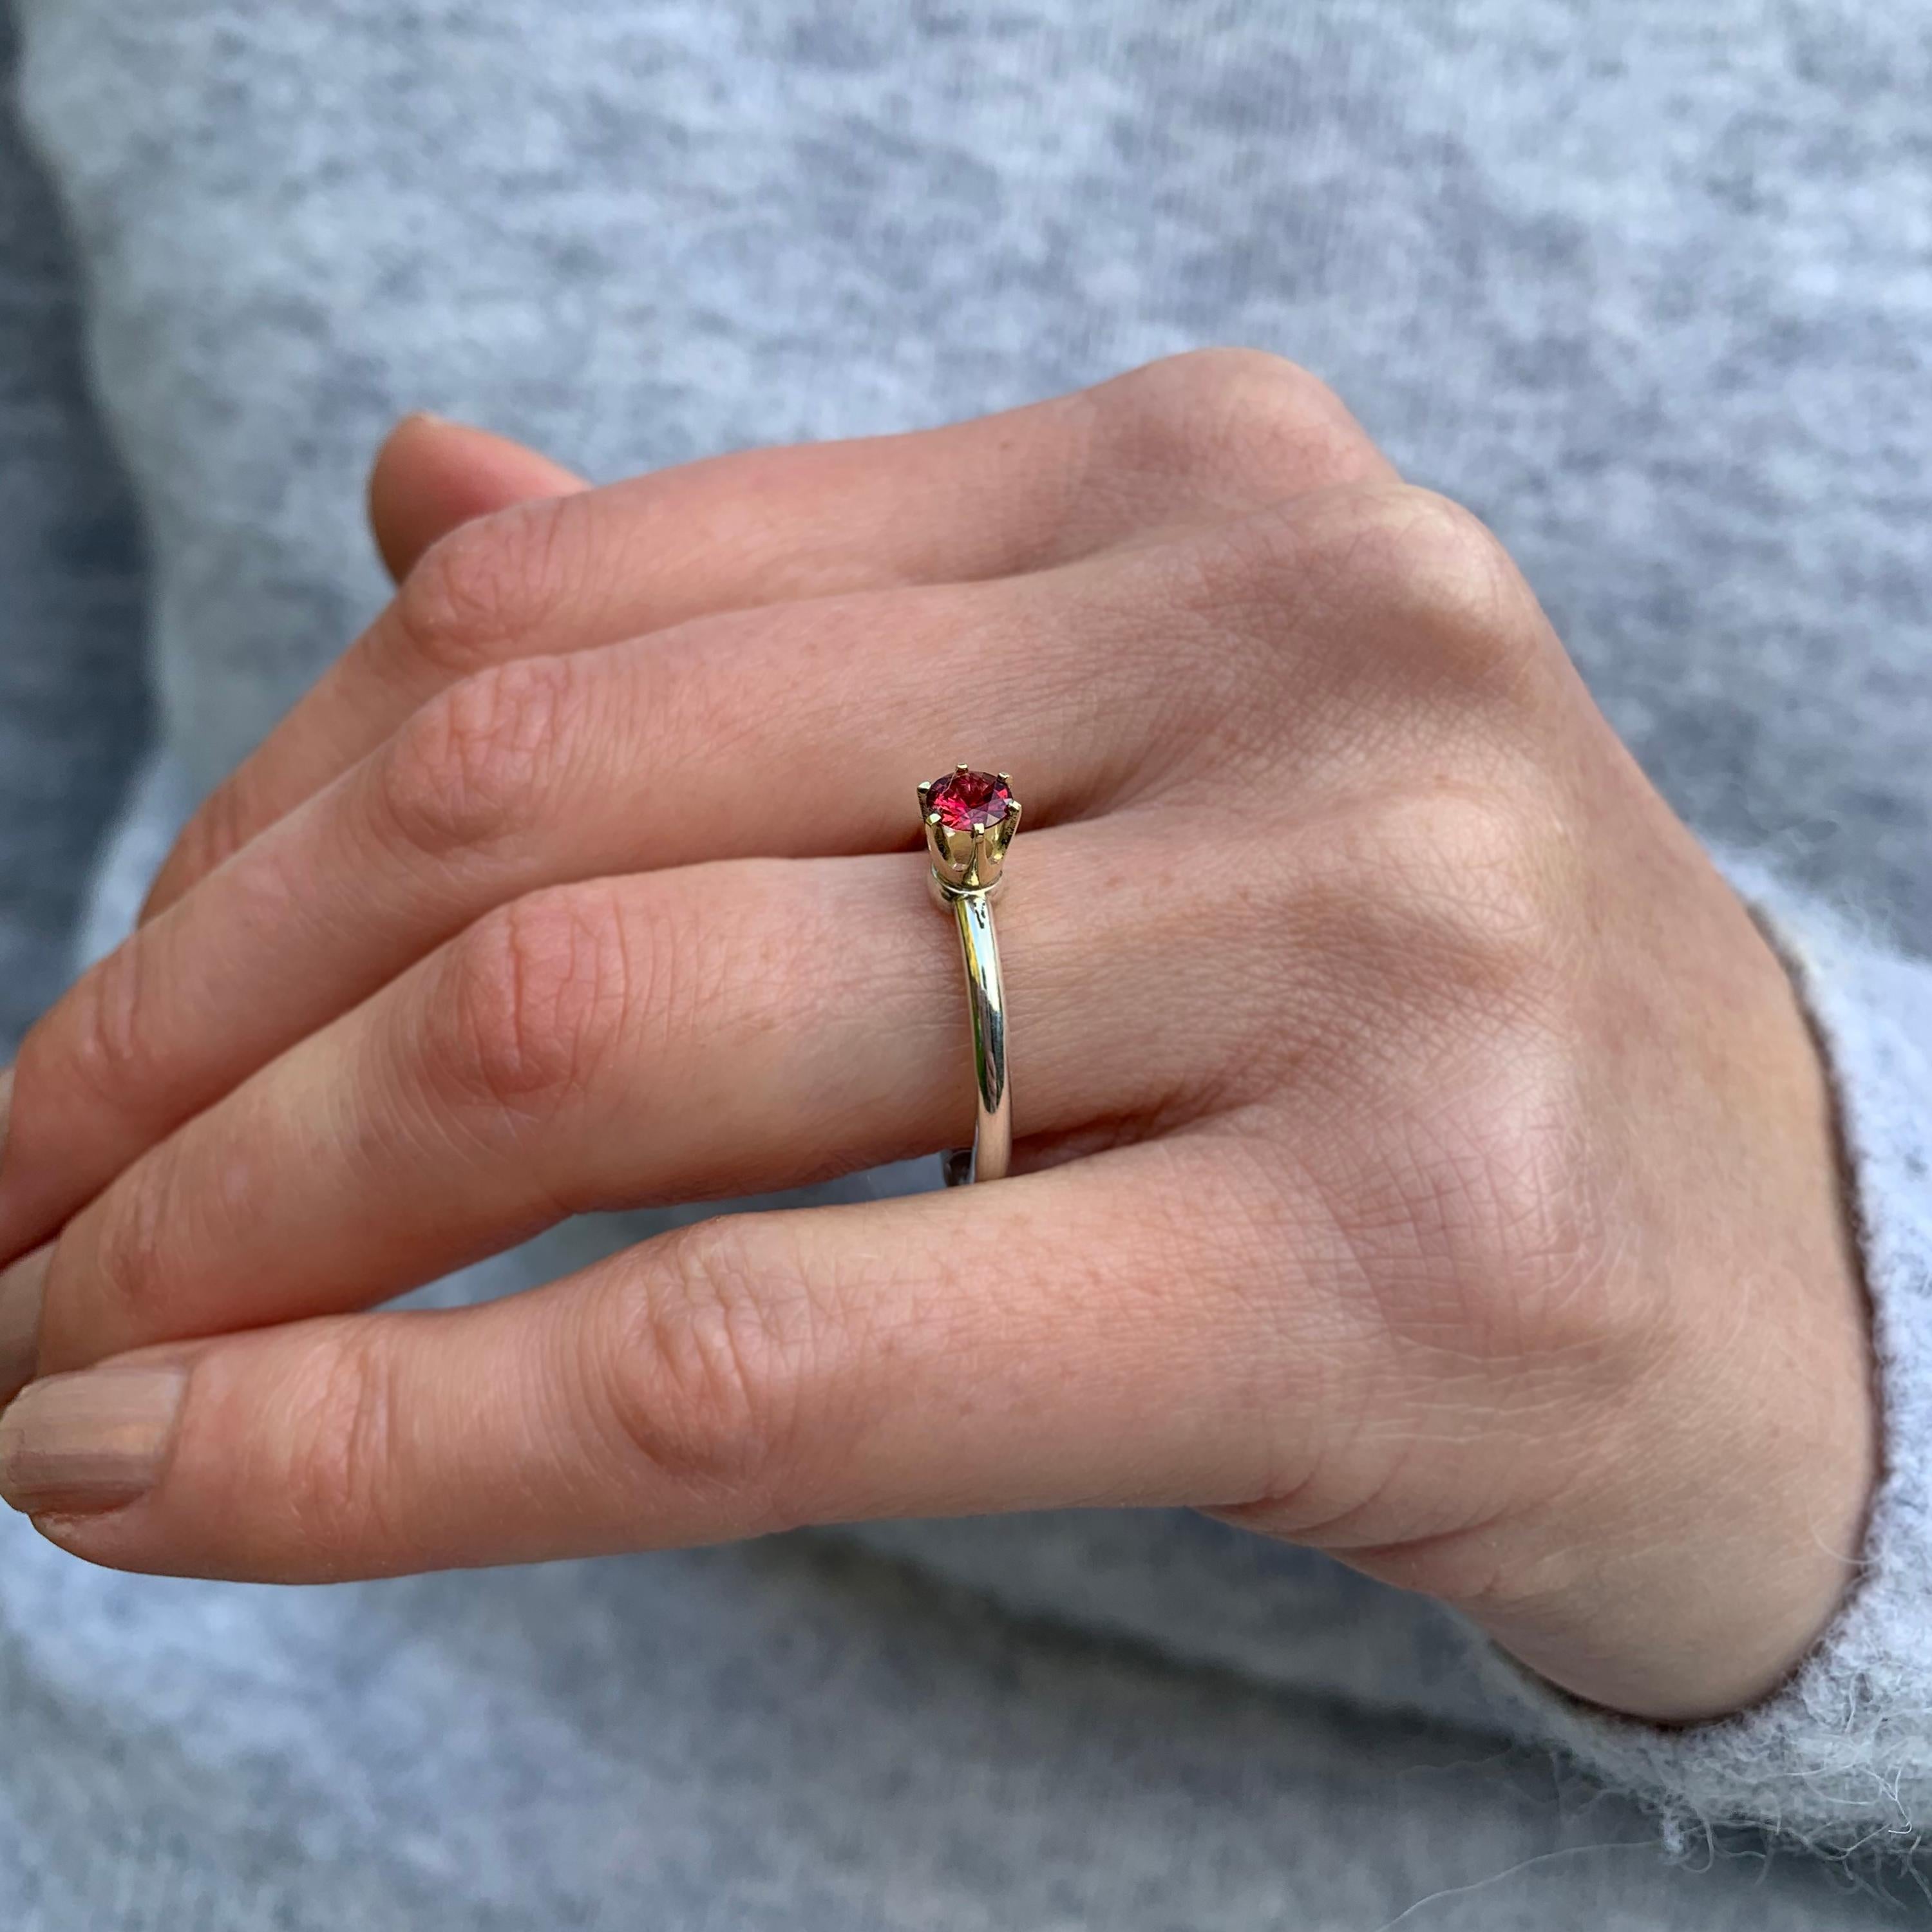 Silver 14 Karat Yellow Gold Red Spinel Crown Ring In New Condition For Sale In Dublin 2, Dublin 2